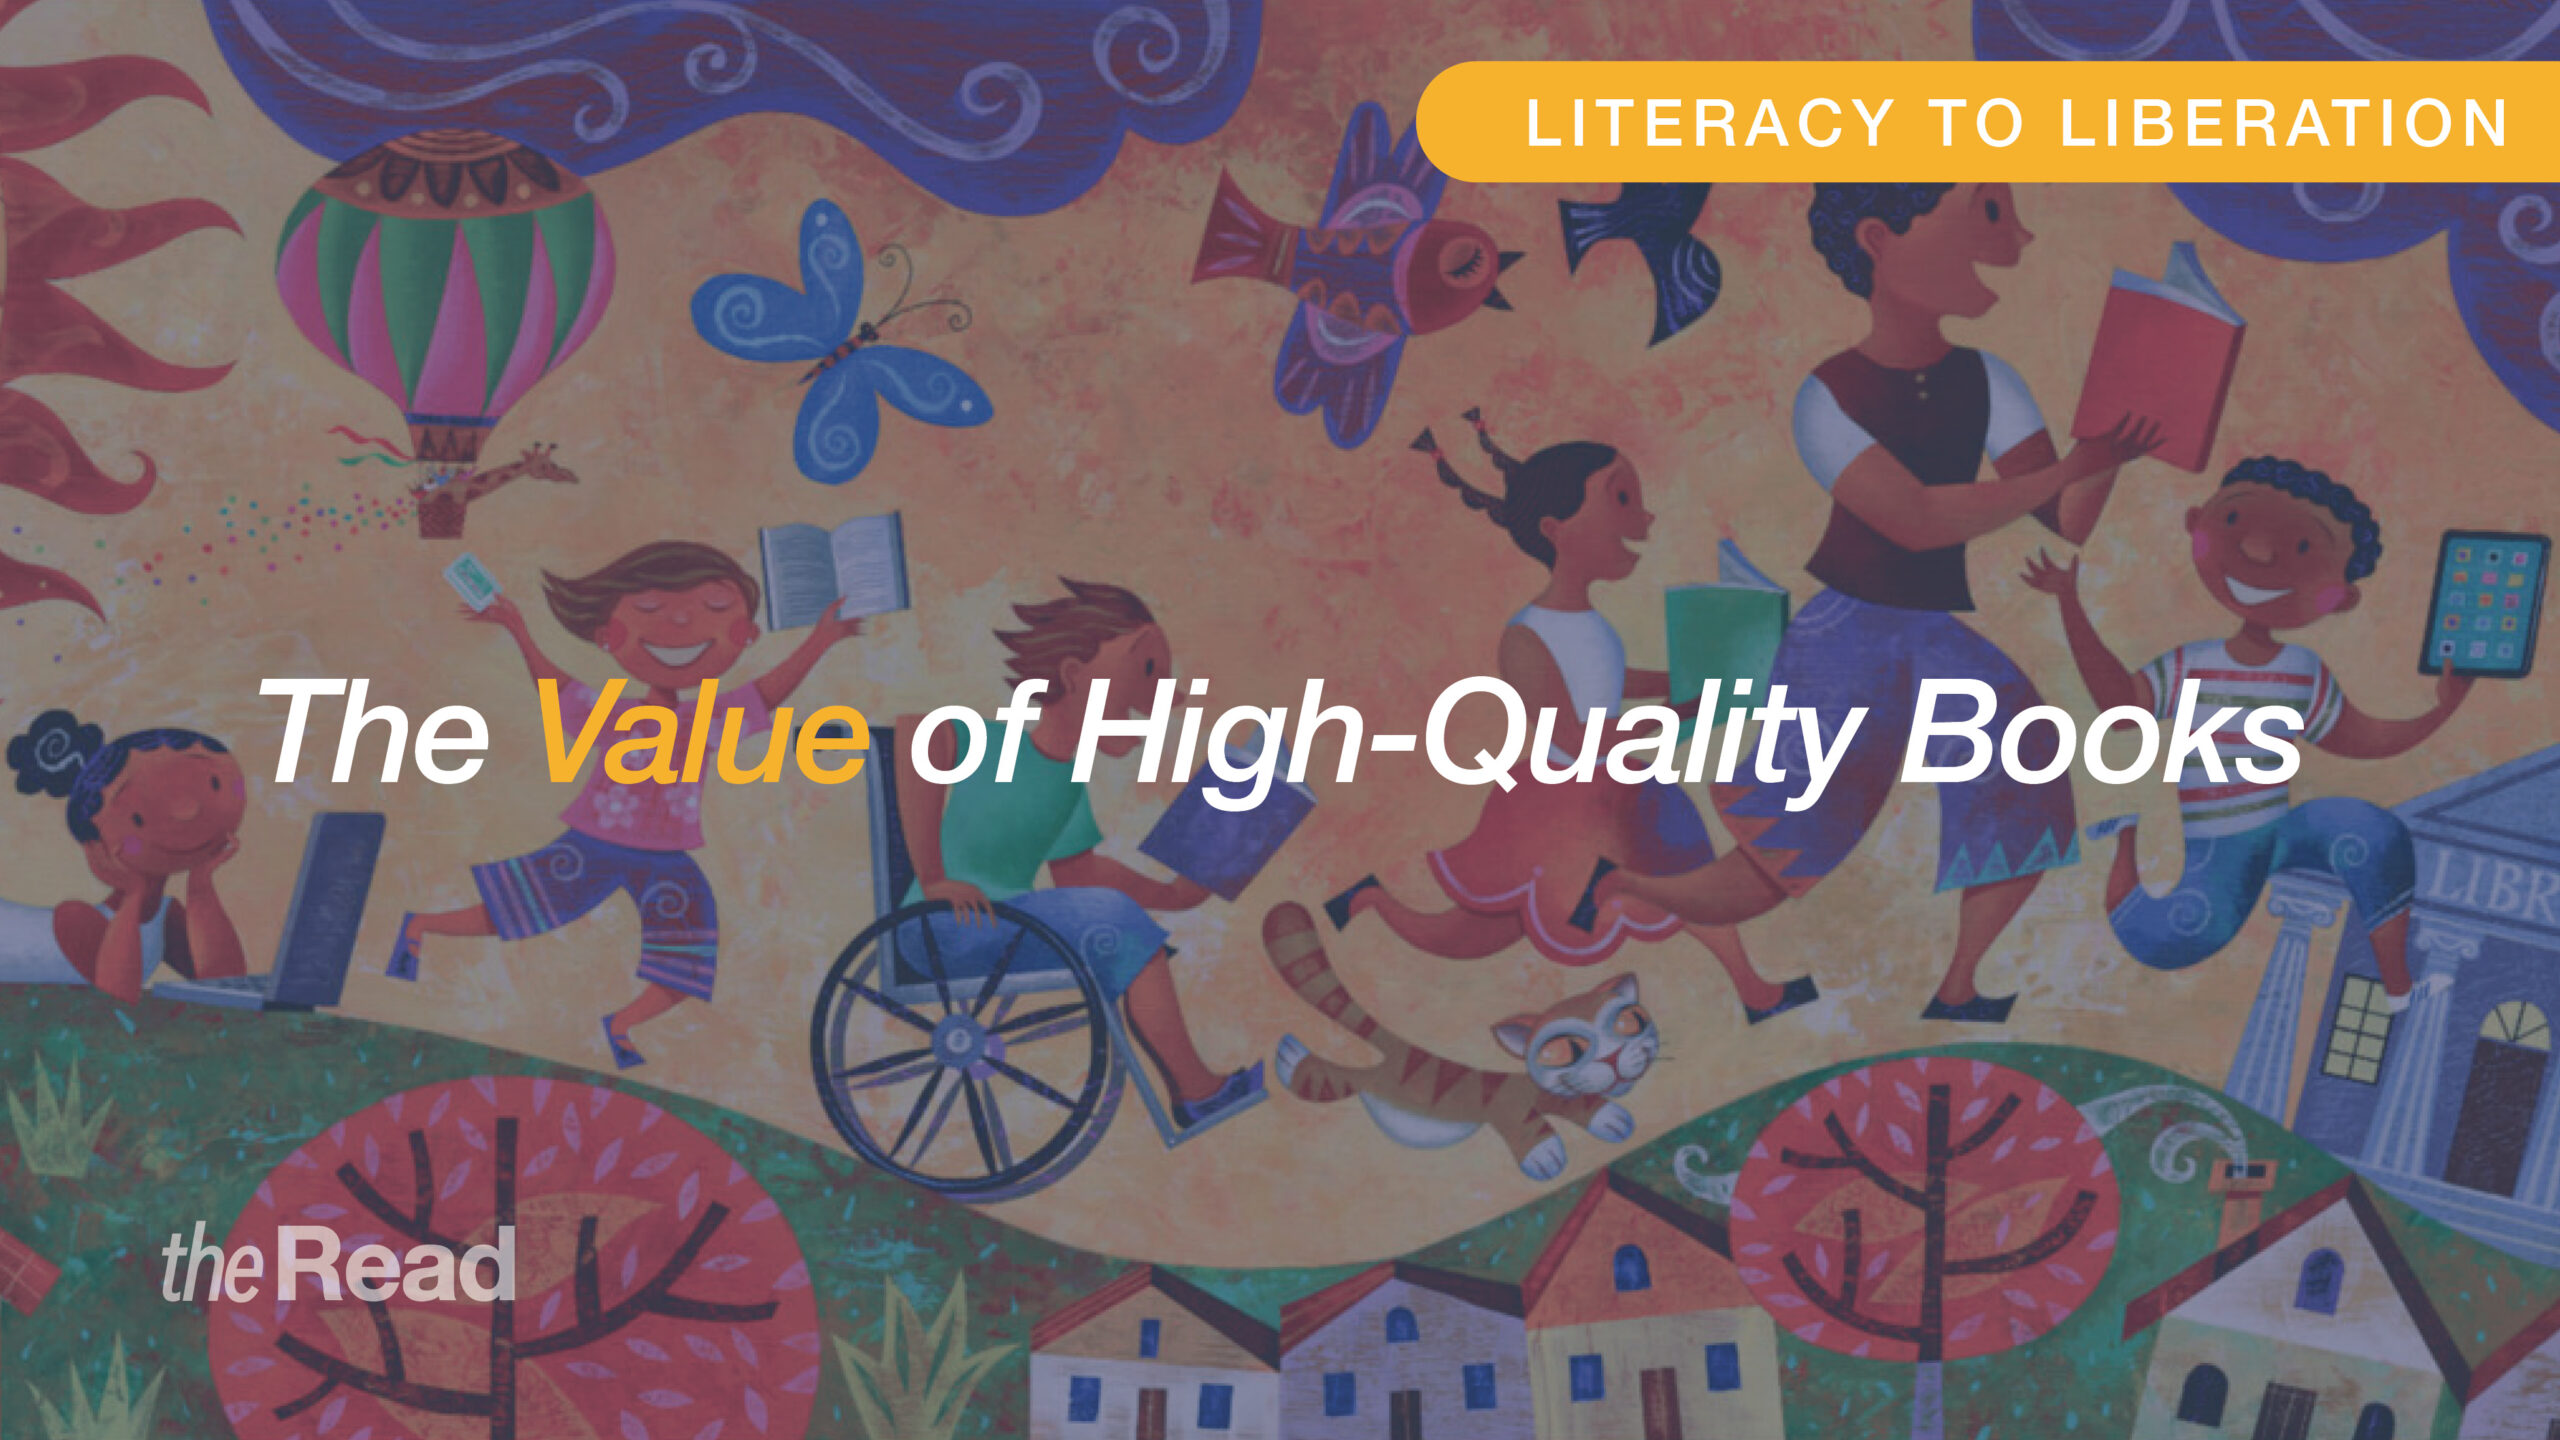 Featured image for “The Value of High-Quality Books”